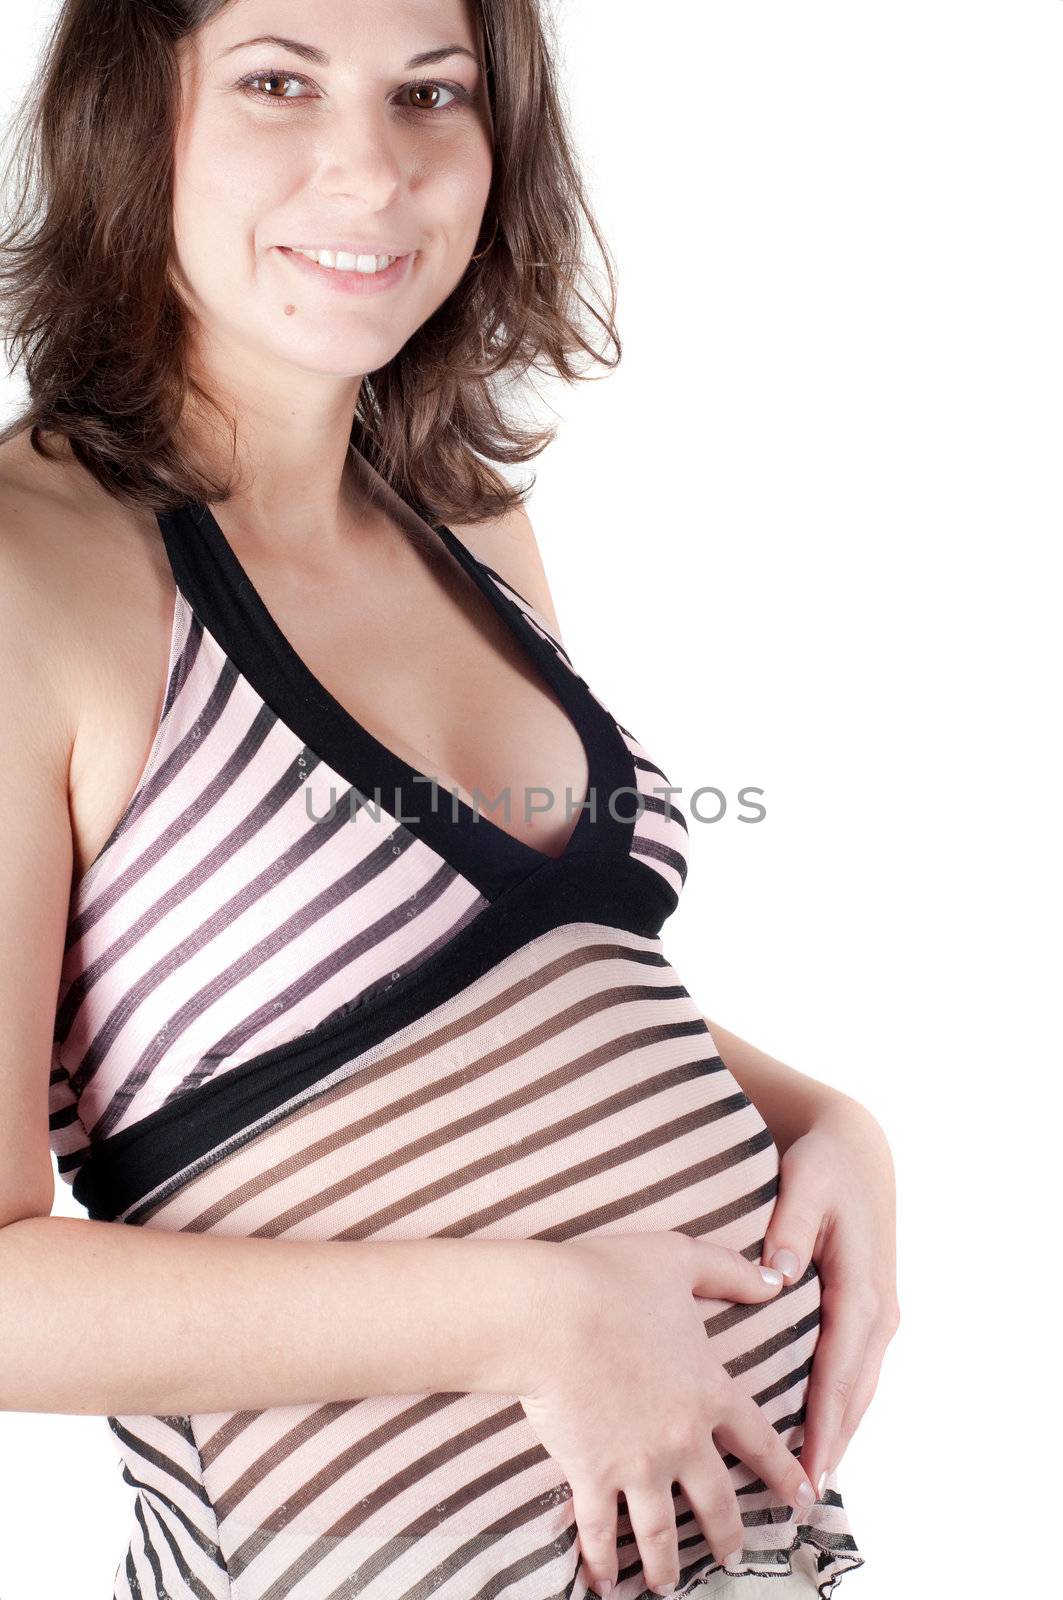 Pregnant woman holding her hands in form of heart sign on her belly